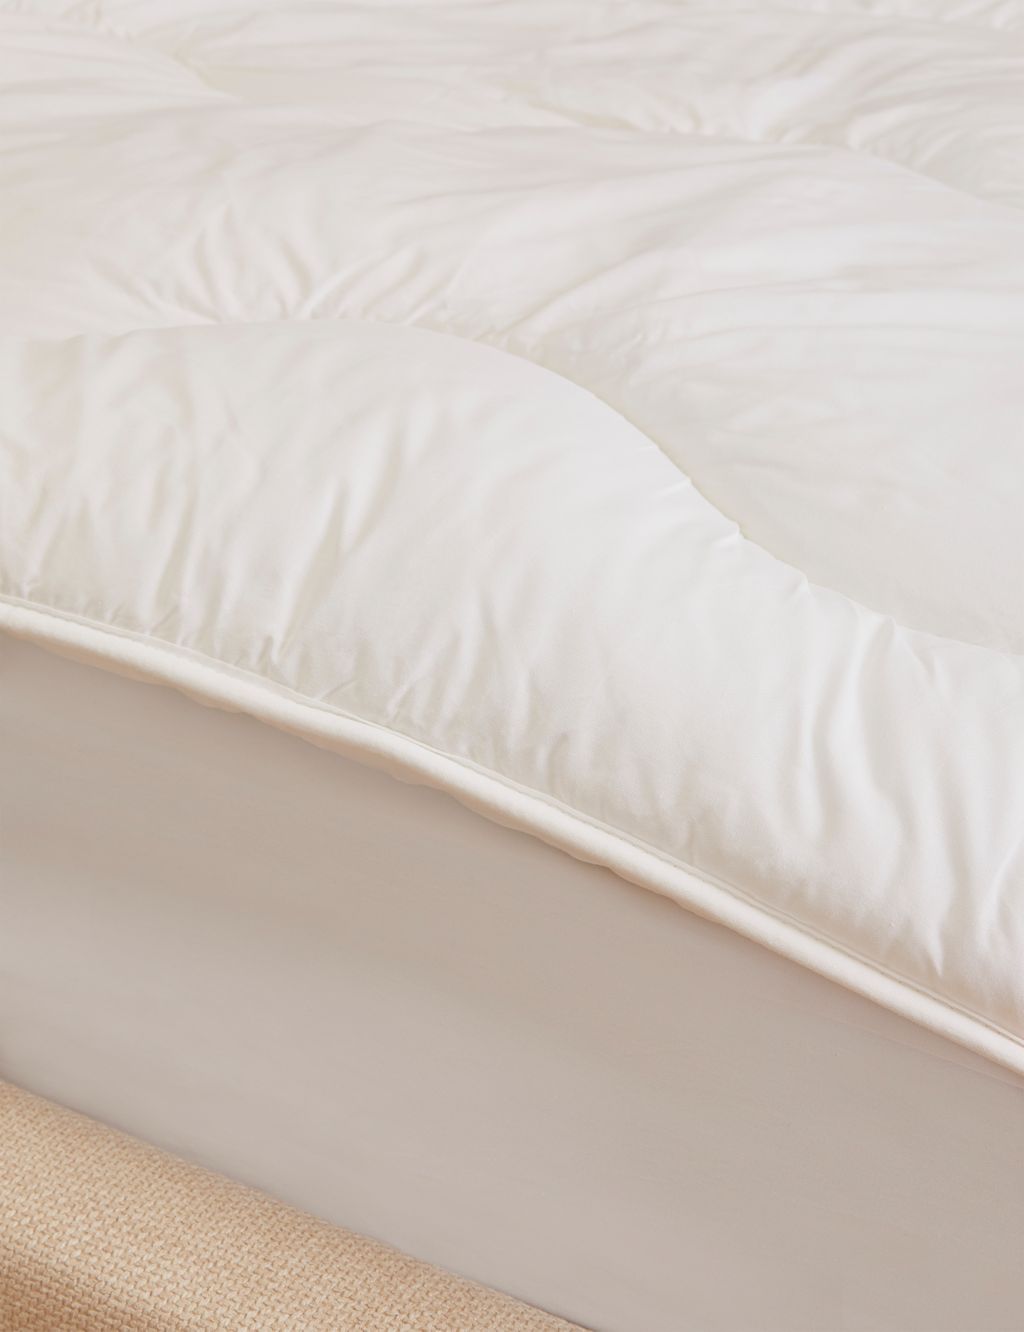 Comfortably Cool Mattress Topper image 2